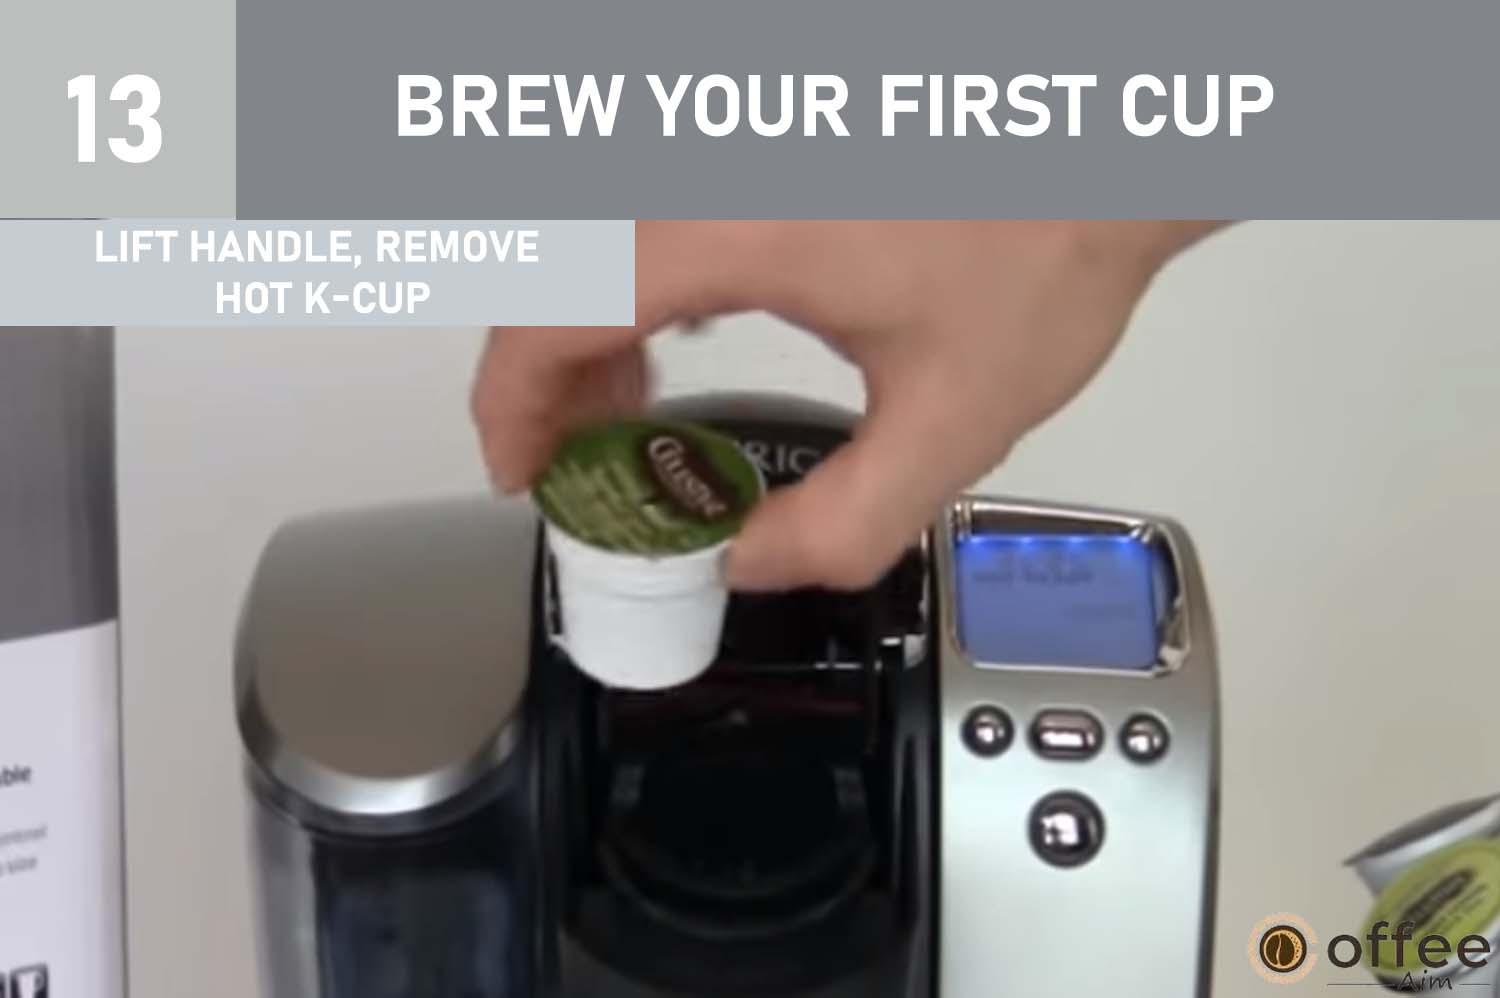 After brewing, exercise caution with the hot K-Cup. Lift the machine's handle, remove the used K-Cup, and dispose of it properly in a designated waste bin.